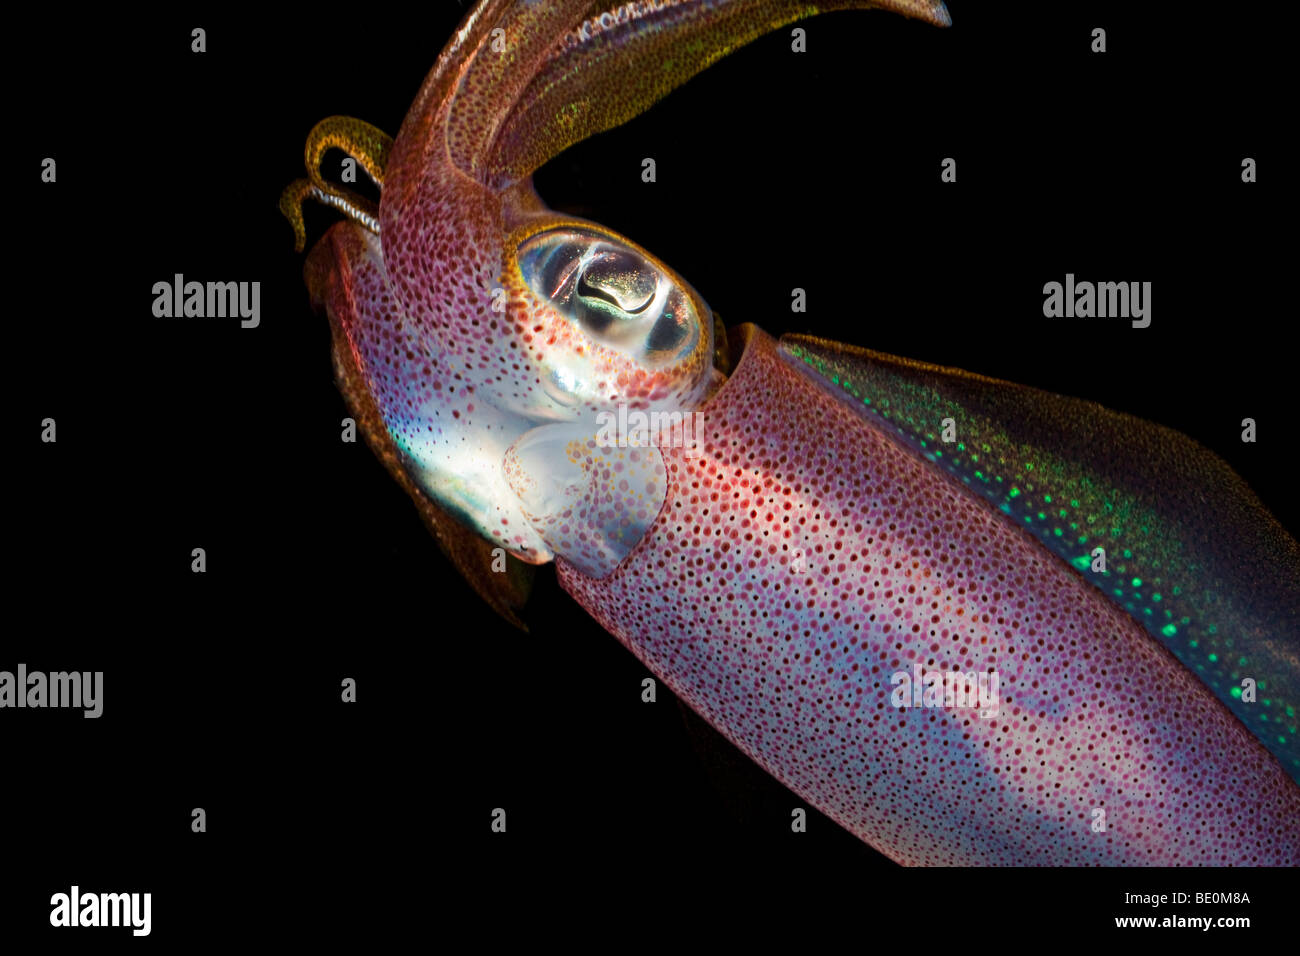 The oval squid, Sepioteuthis lessoniana, can reach 14 inches in length. Hawaii. Stock Photo